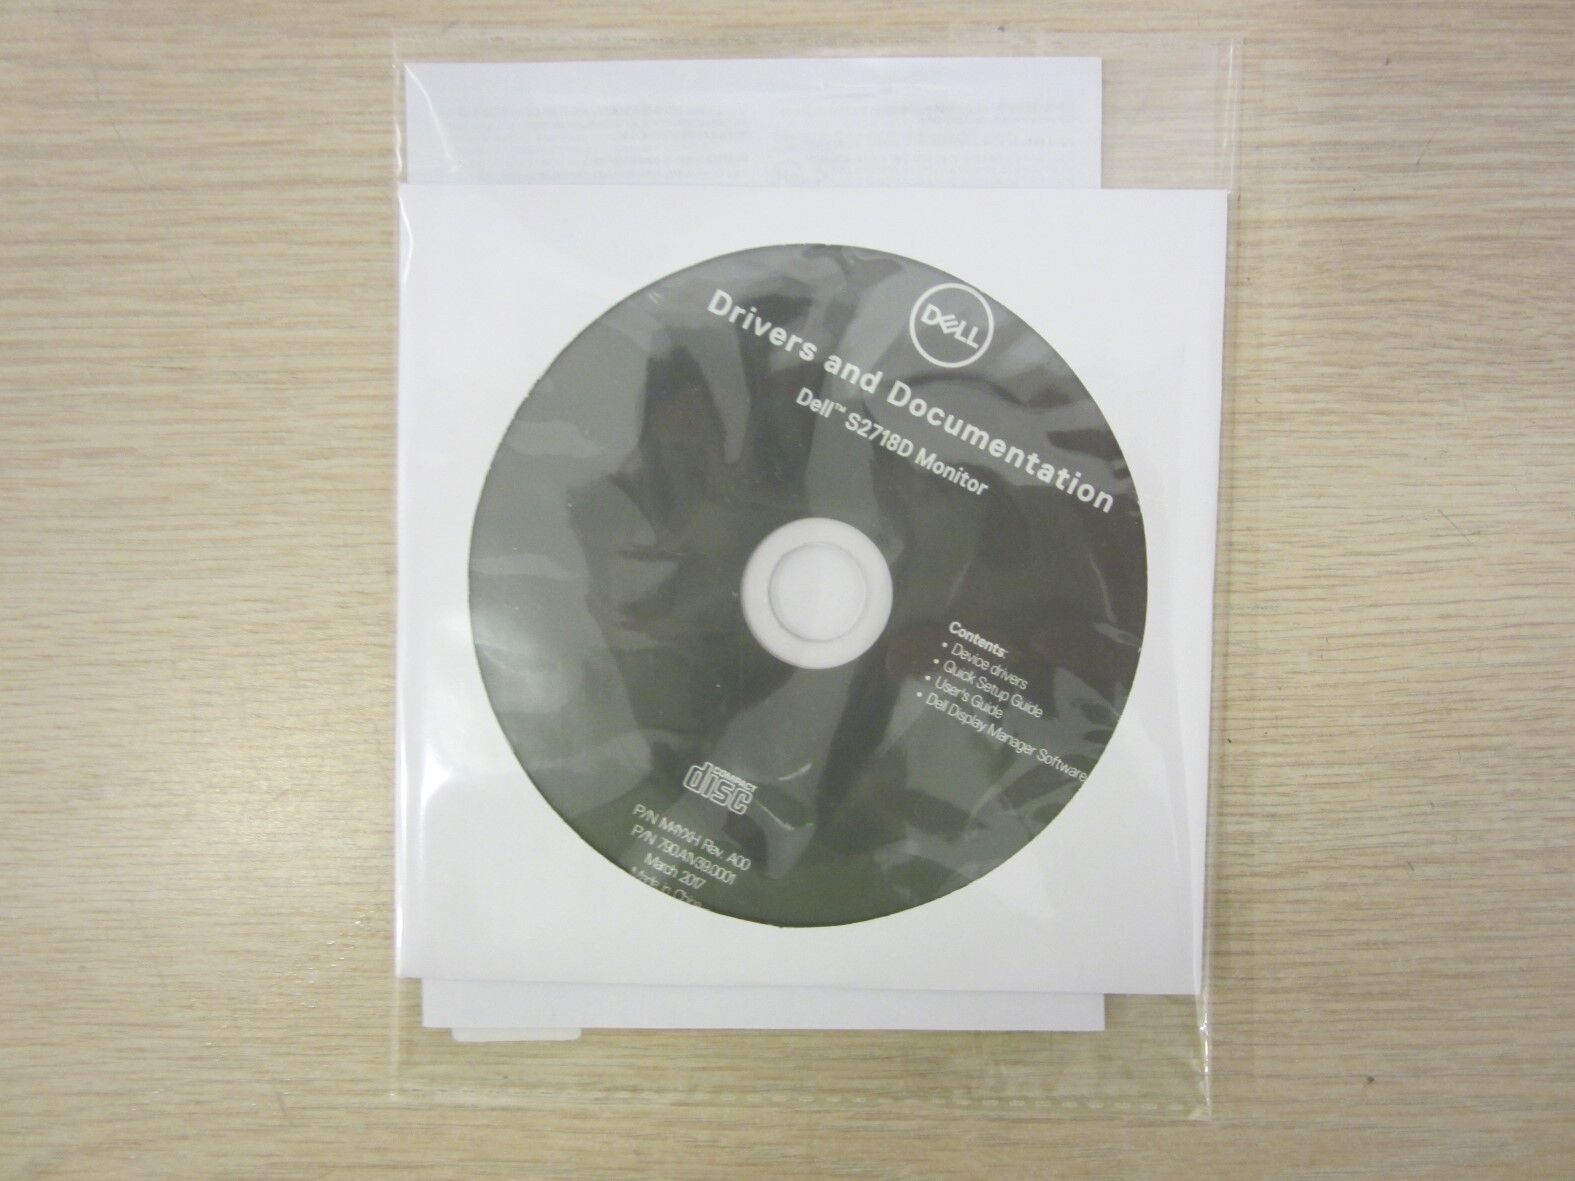 DELL S2718D 27'' MONITOR DRIVERS AND DOCUMENTATION CD, USER/SETUP GUIDE FREE S&H